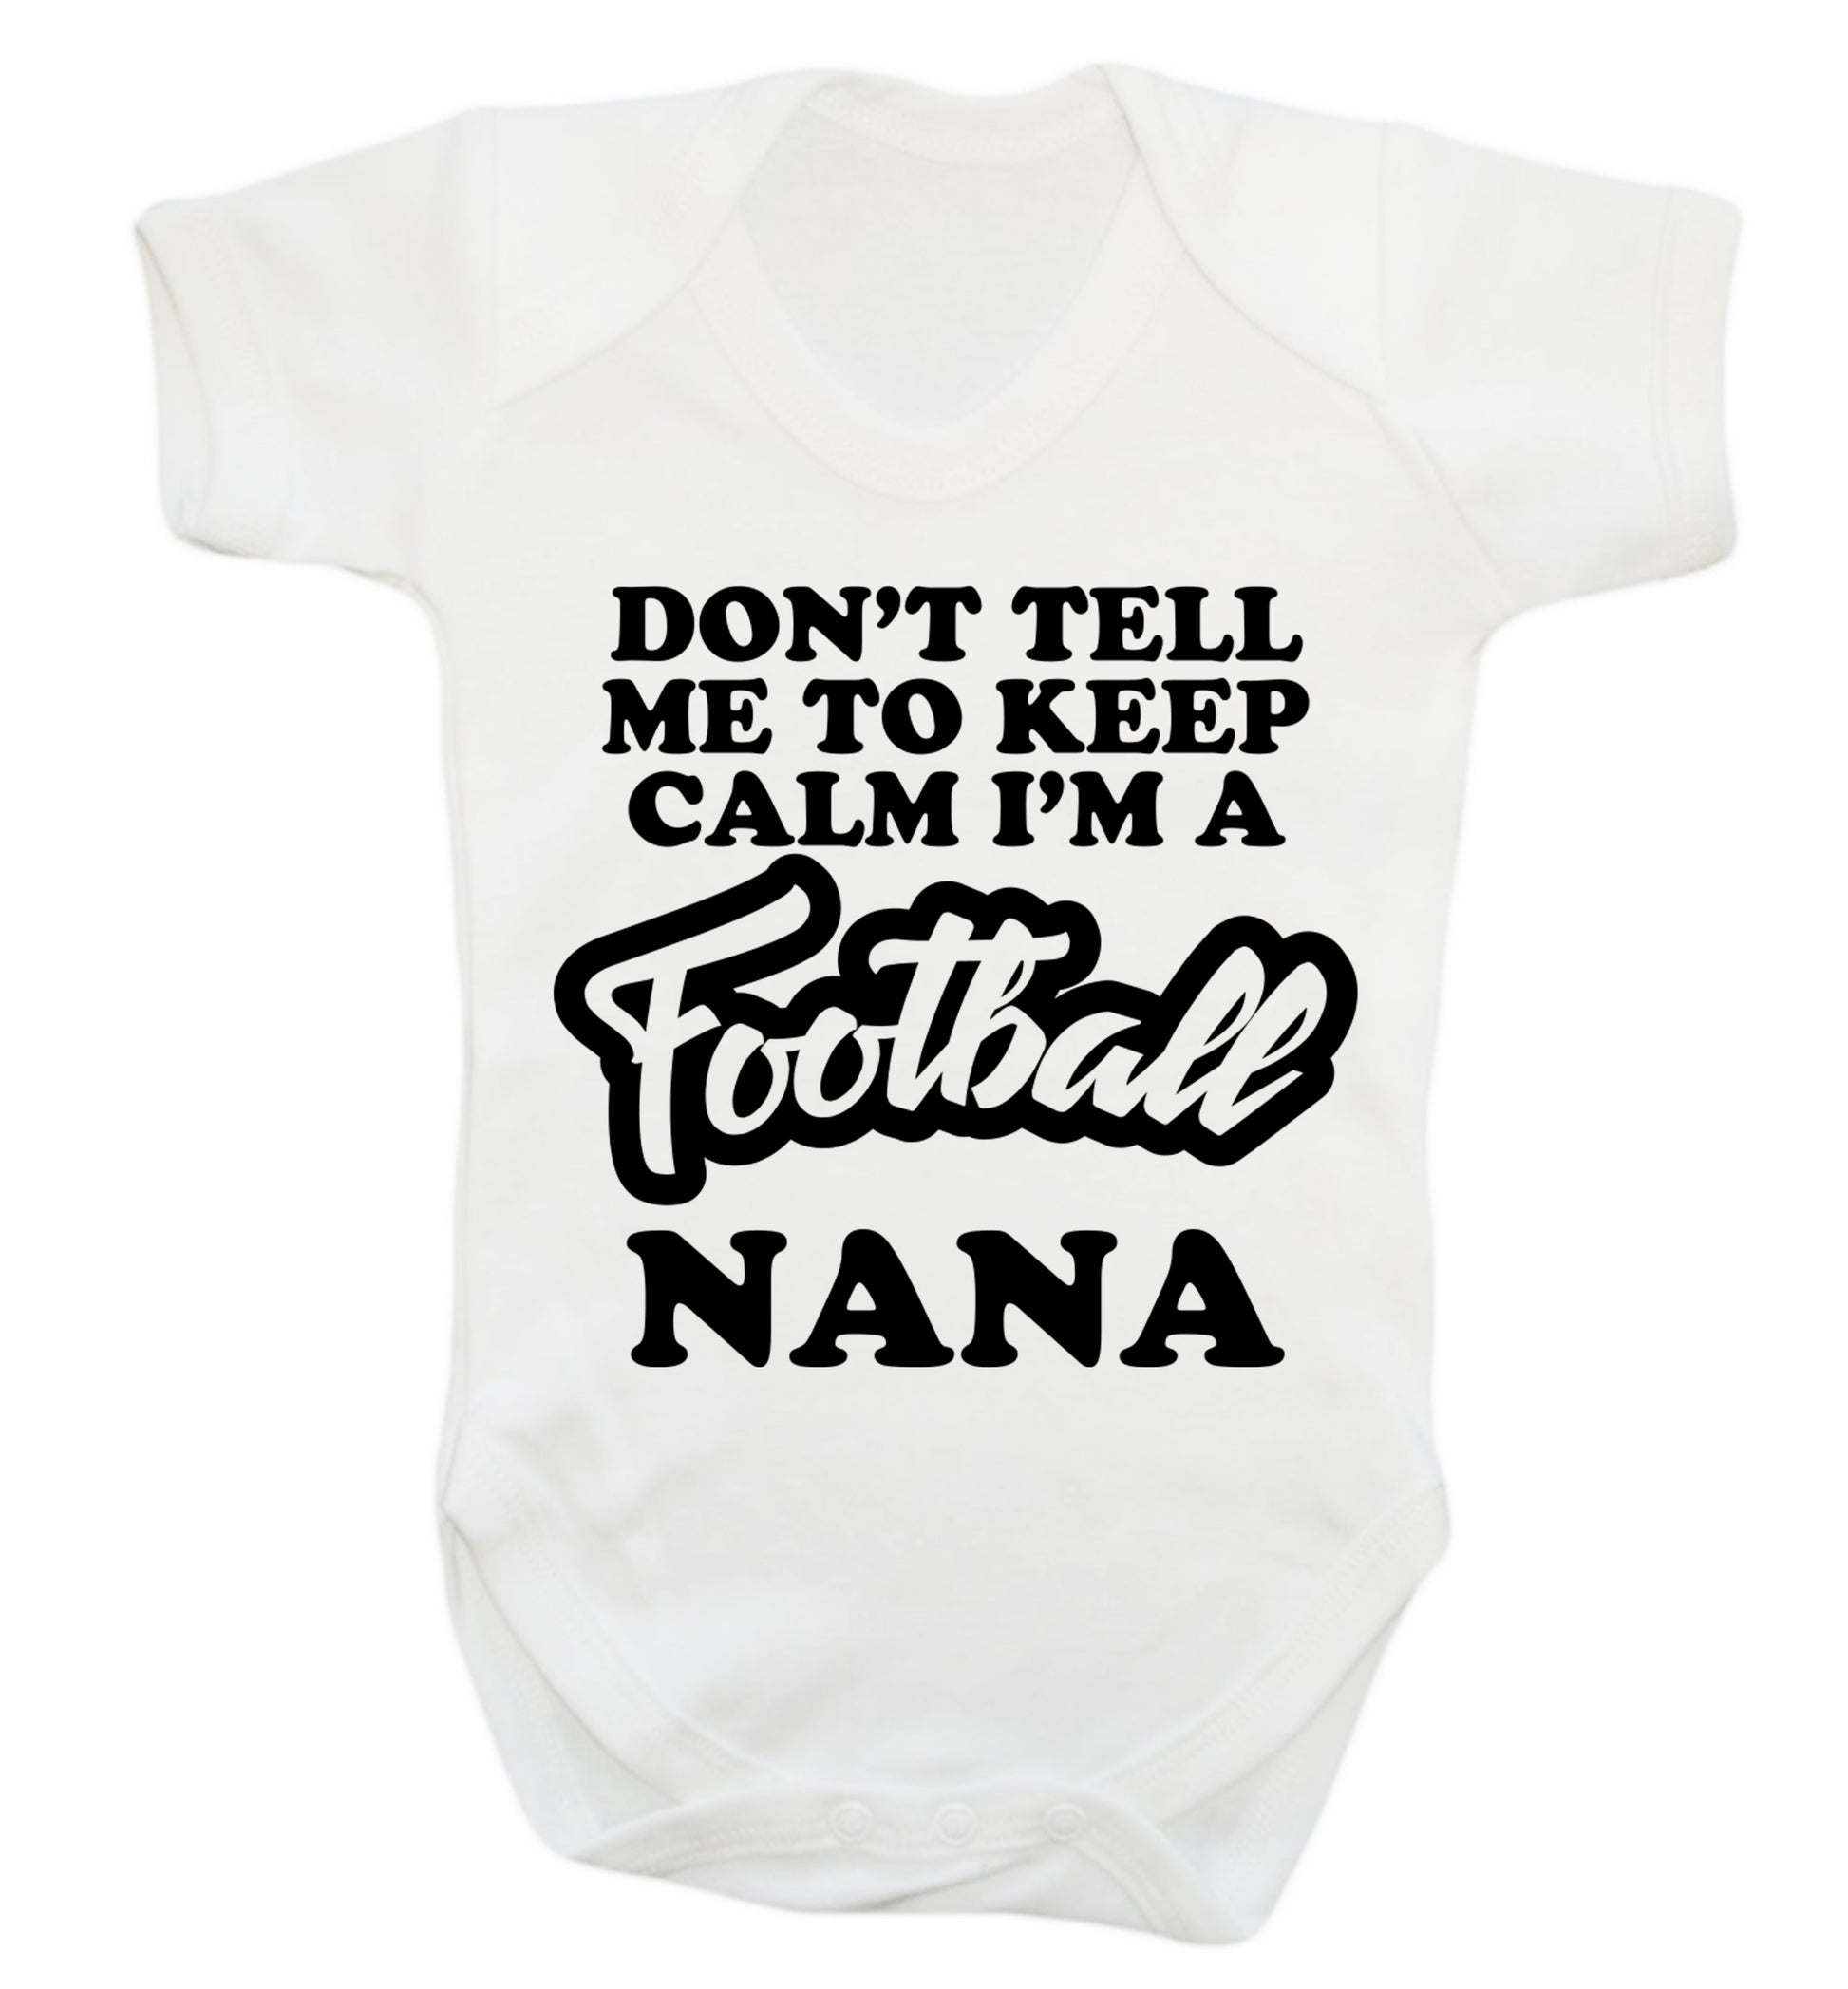 Don't tell me to keep calm I'm a football nana Baby Vest white 18-24 months